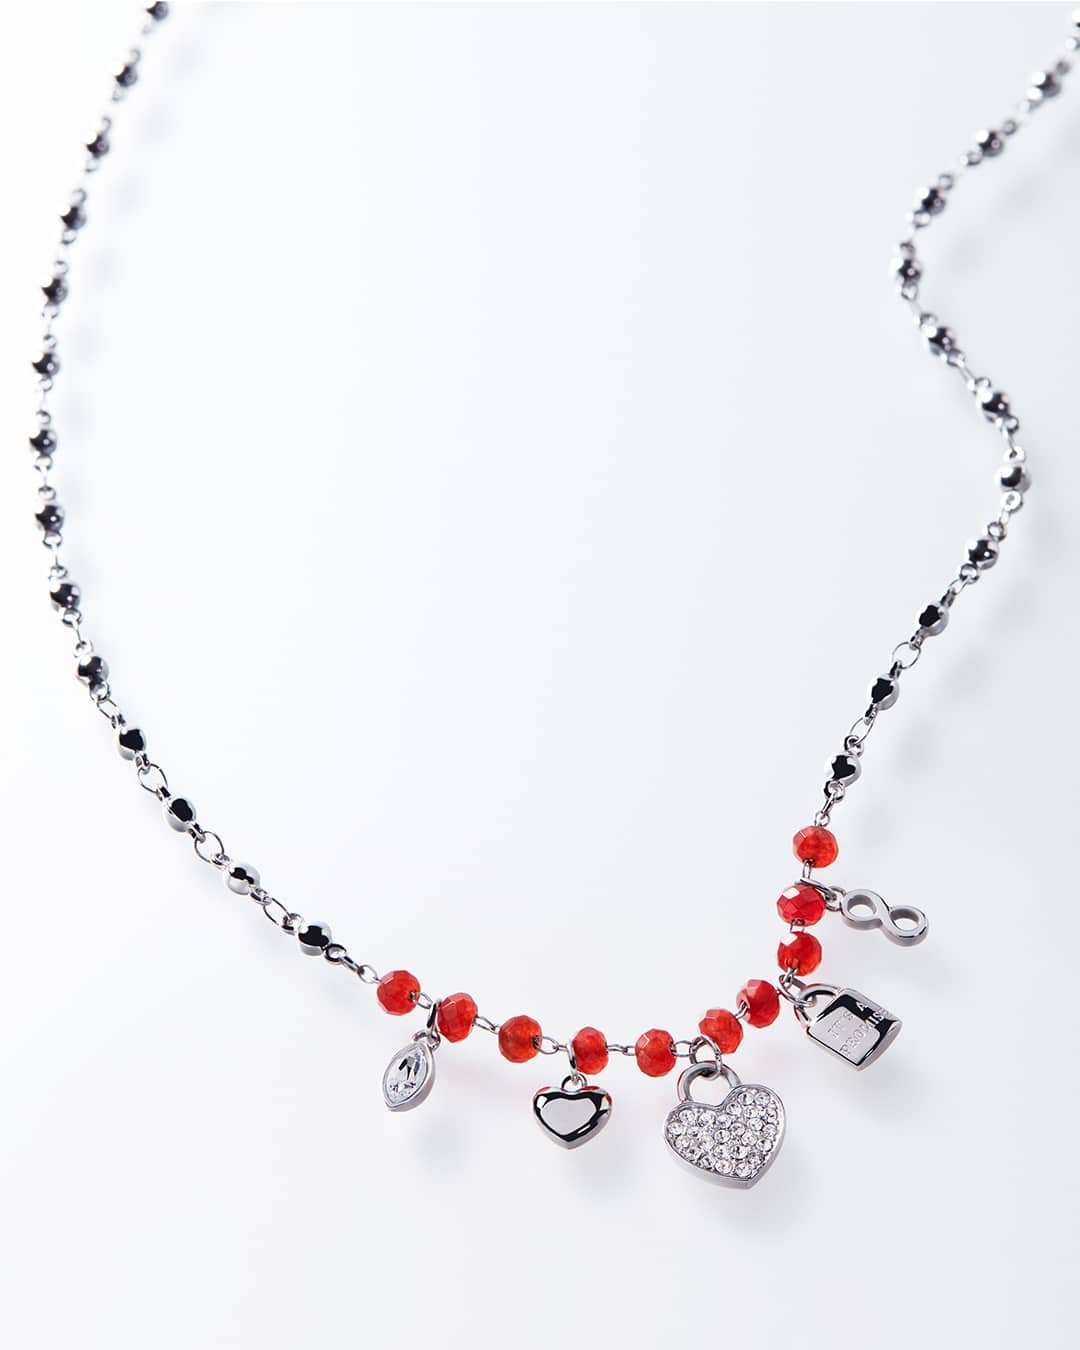 necklaces with charms